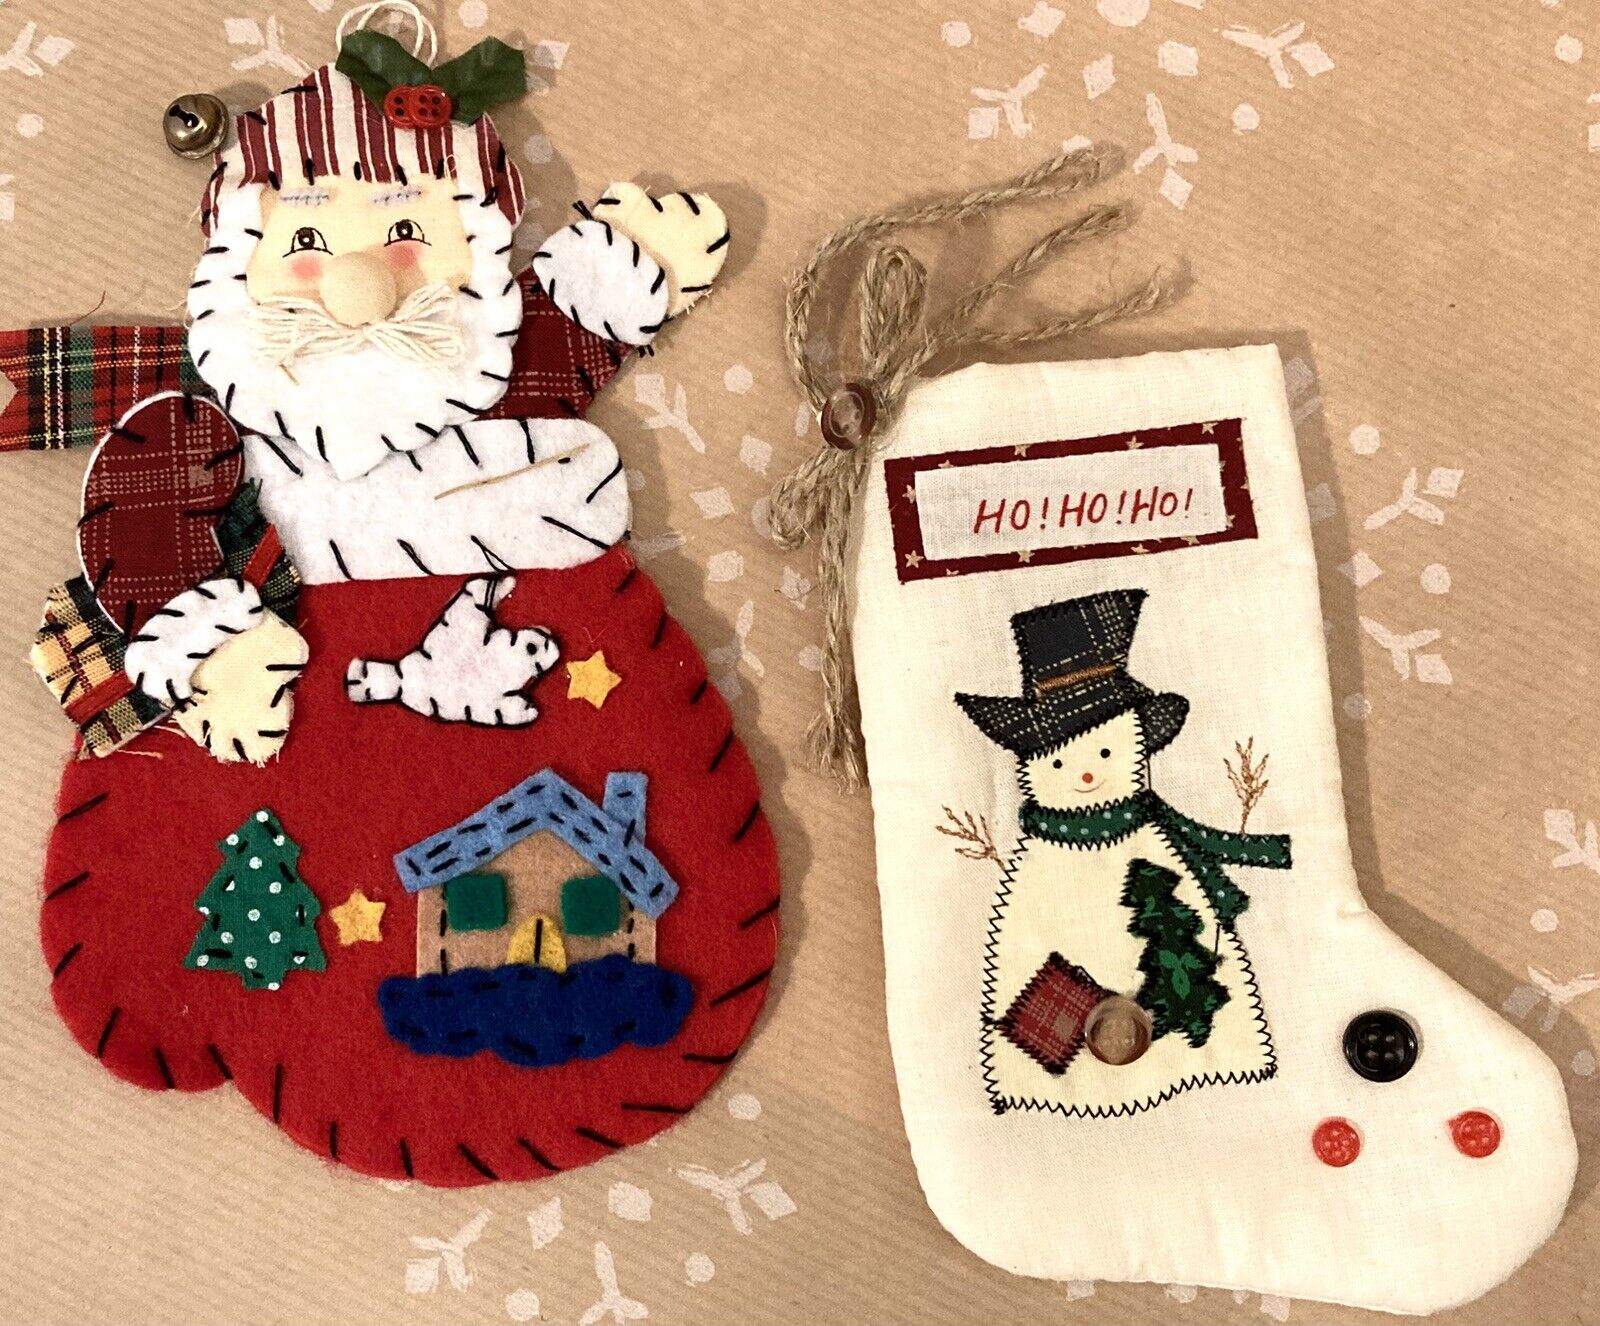 2 Vintage Hand Stitched Fabric Christmas Ornaments Hand Made Button Detail Santa